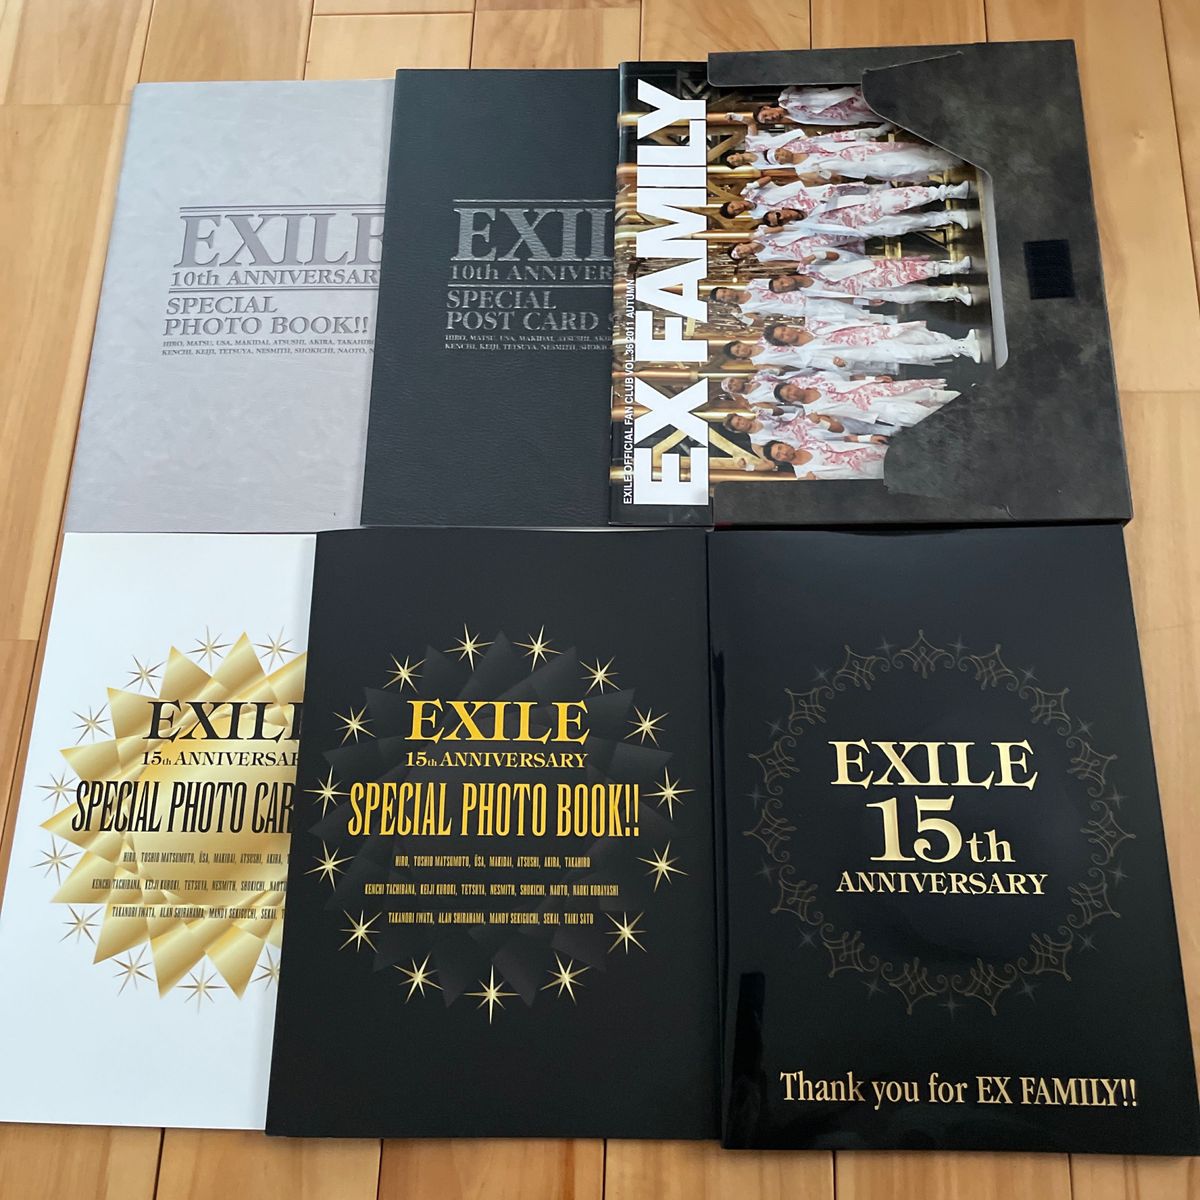 EX FAMILY 会報 セット EXILE ファンクラブ EXFAMILY